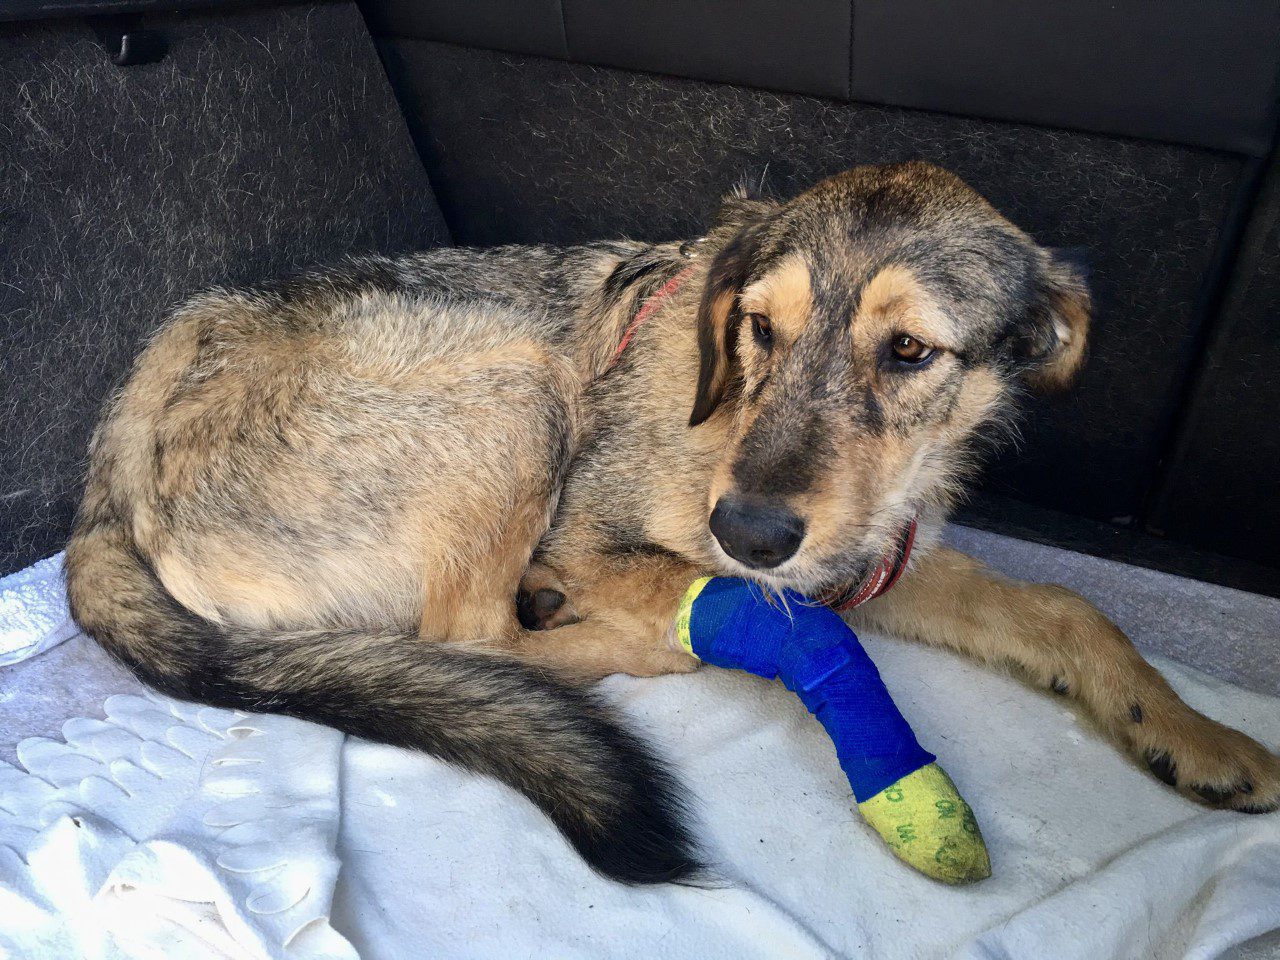 Rafa a tan and brown Romanian rescue dog with a blue bandage on his right fore leg | 1 Dog At A Time Rescue UK